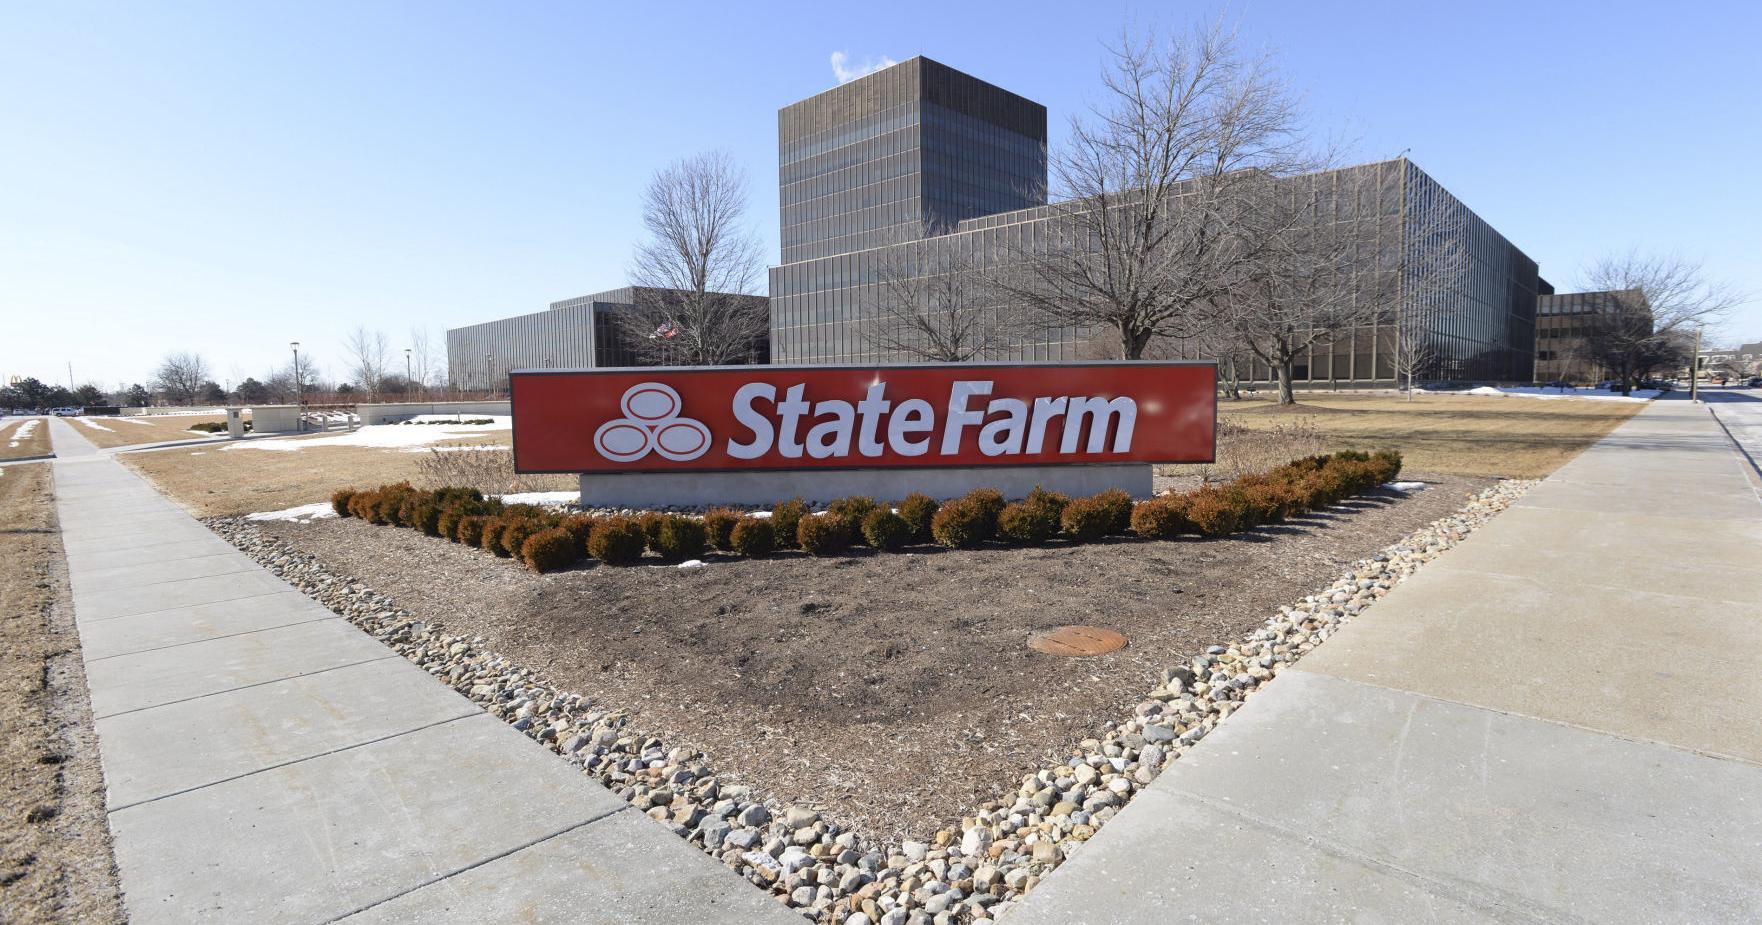 State Farm to hire 3,400 new employees